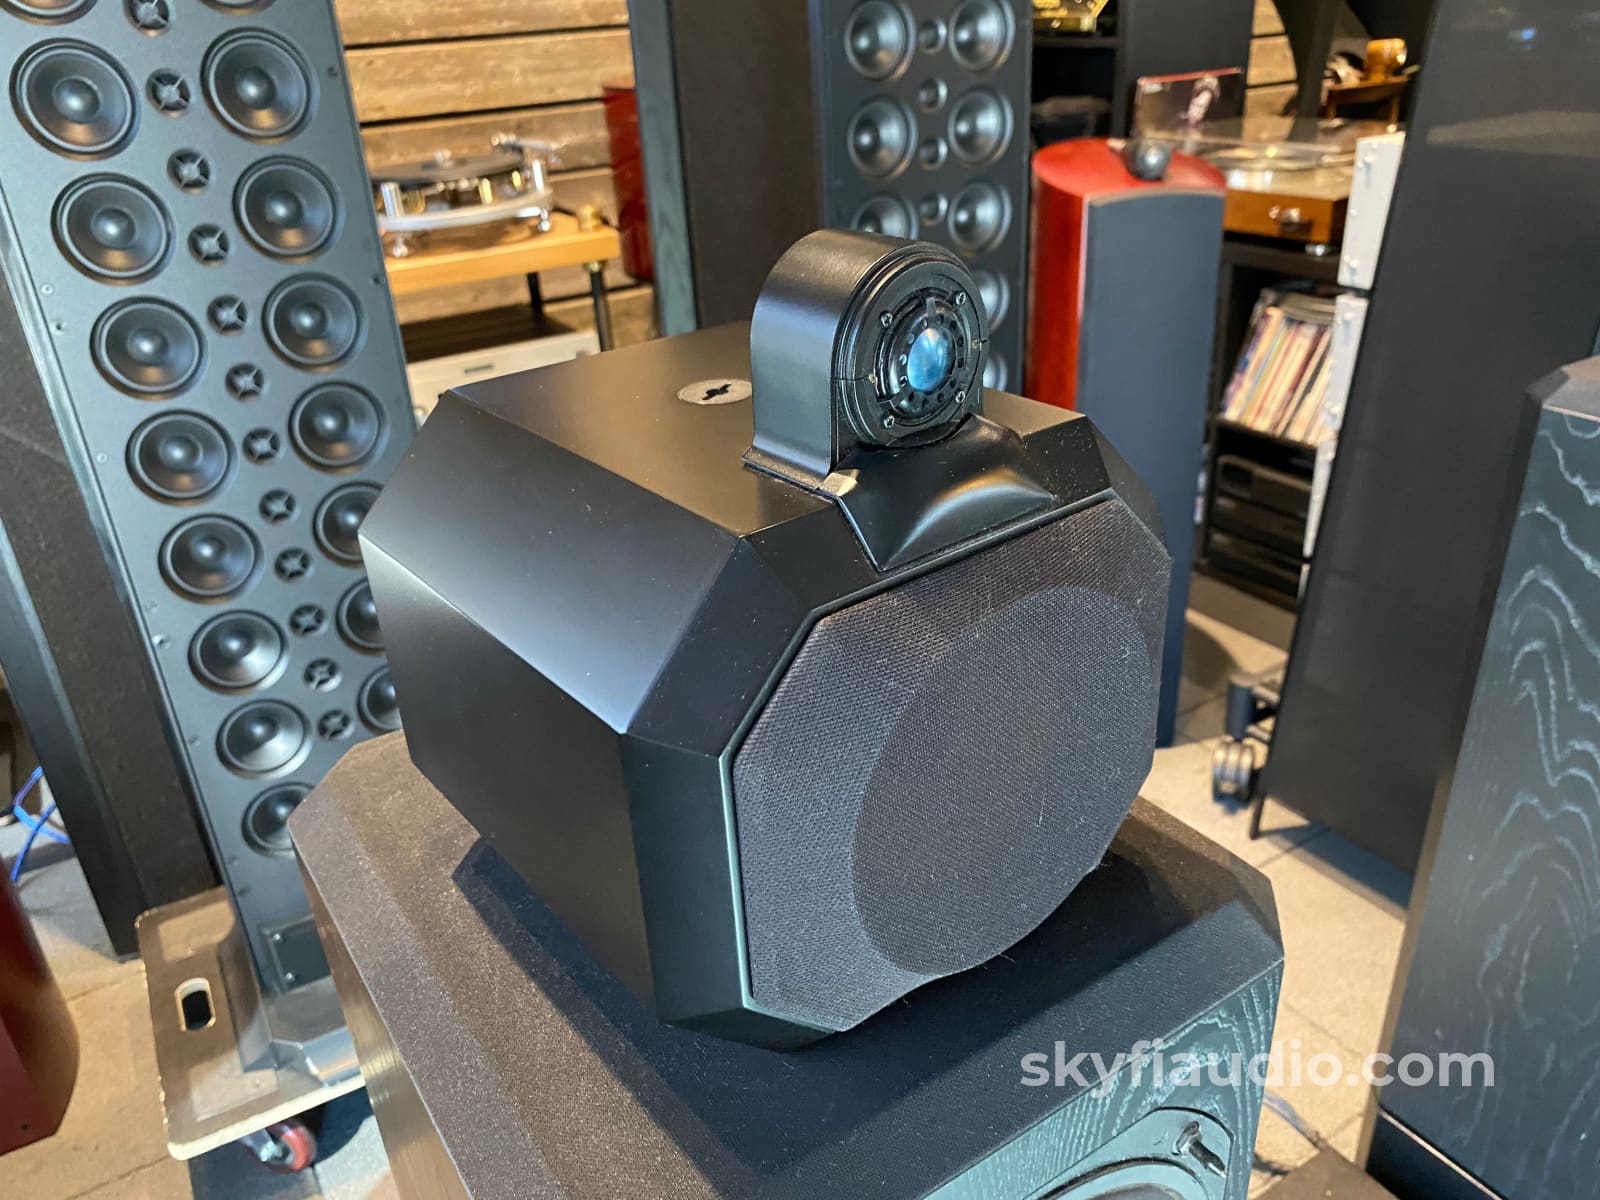 Bowers & Wilkins Matrix 802 Series 2 Speakers - W/External Crossovers Stands And Boxes